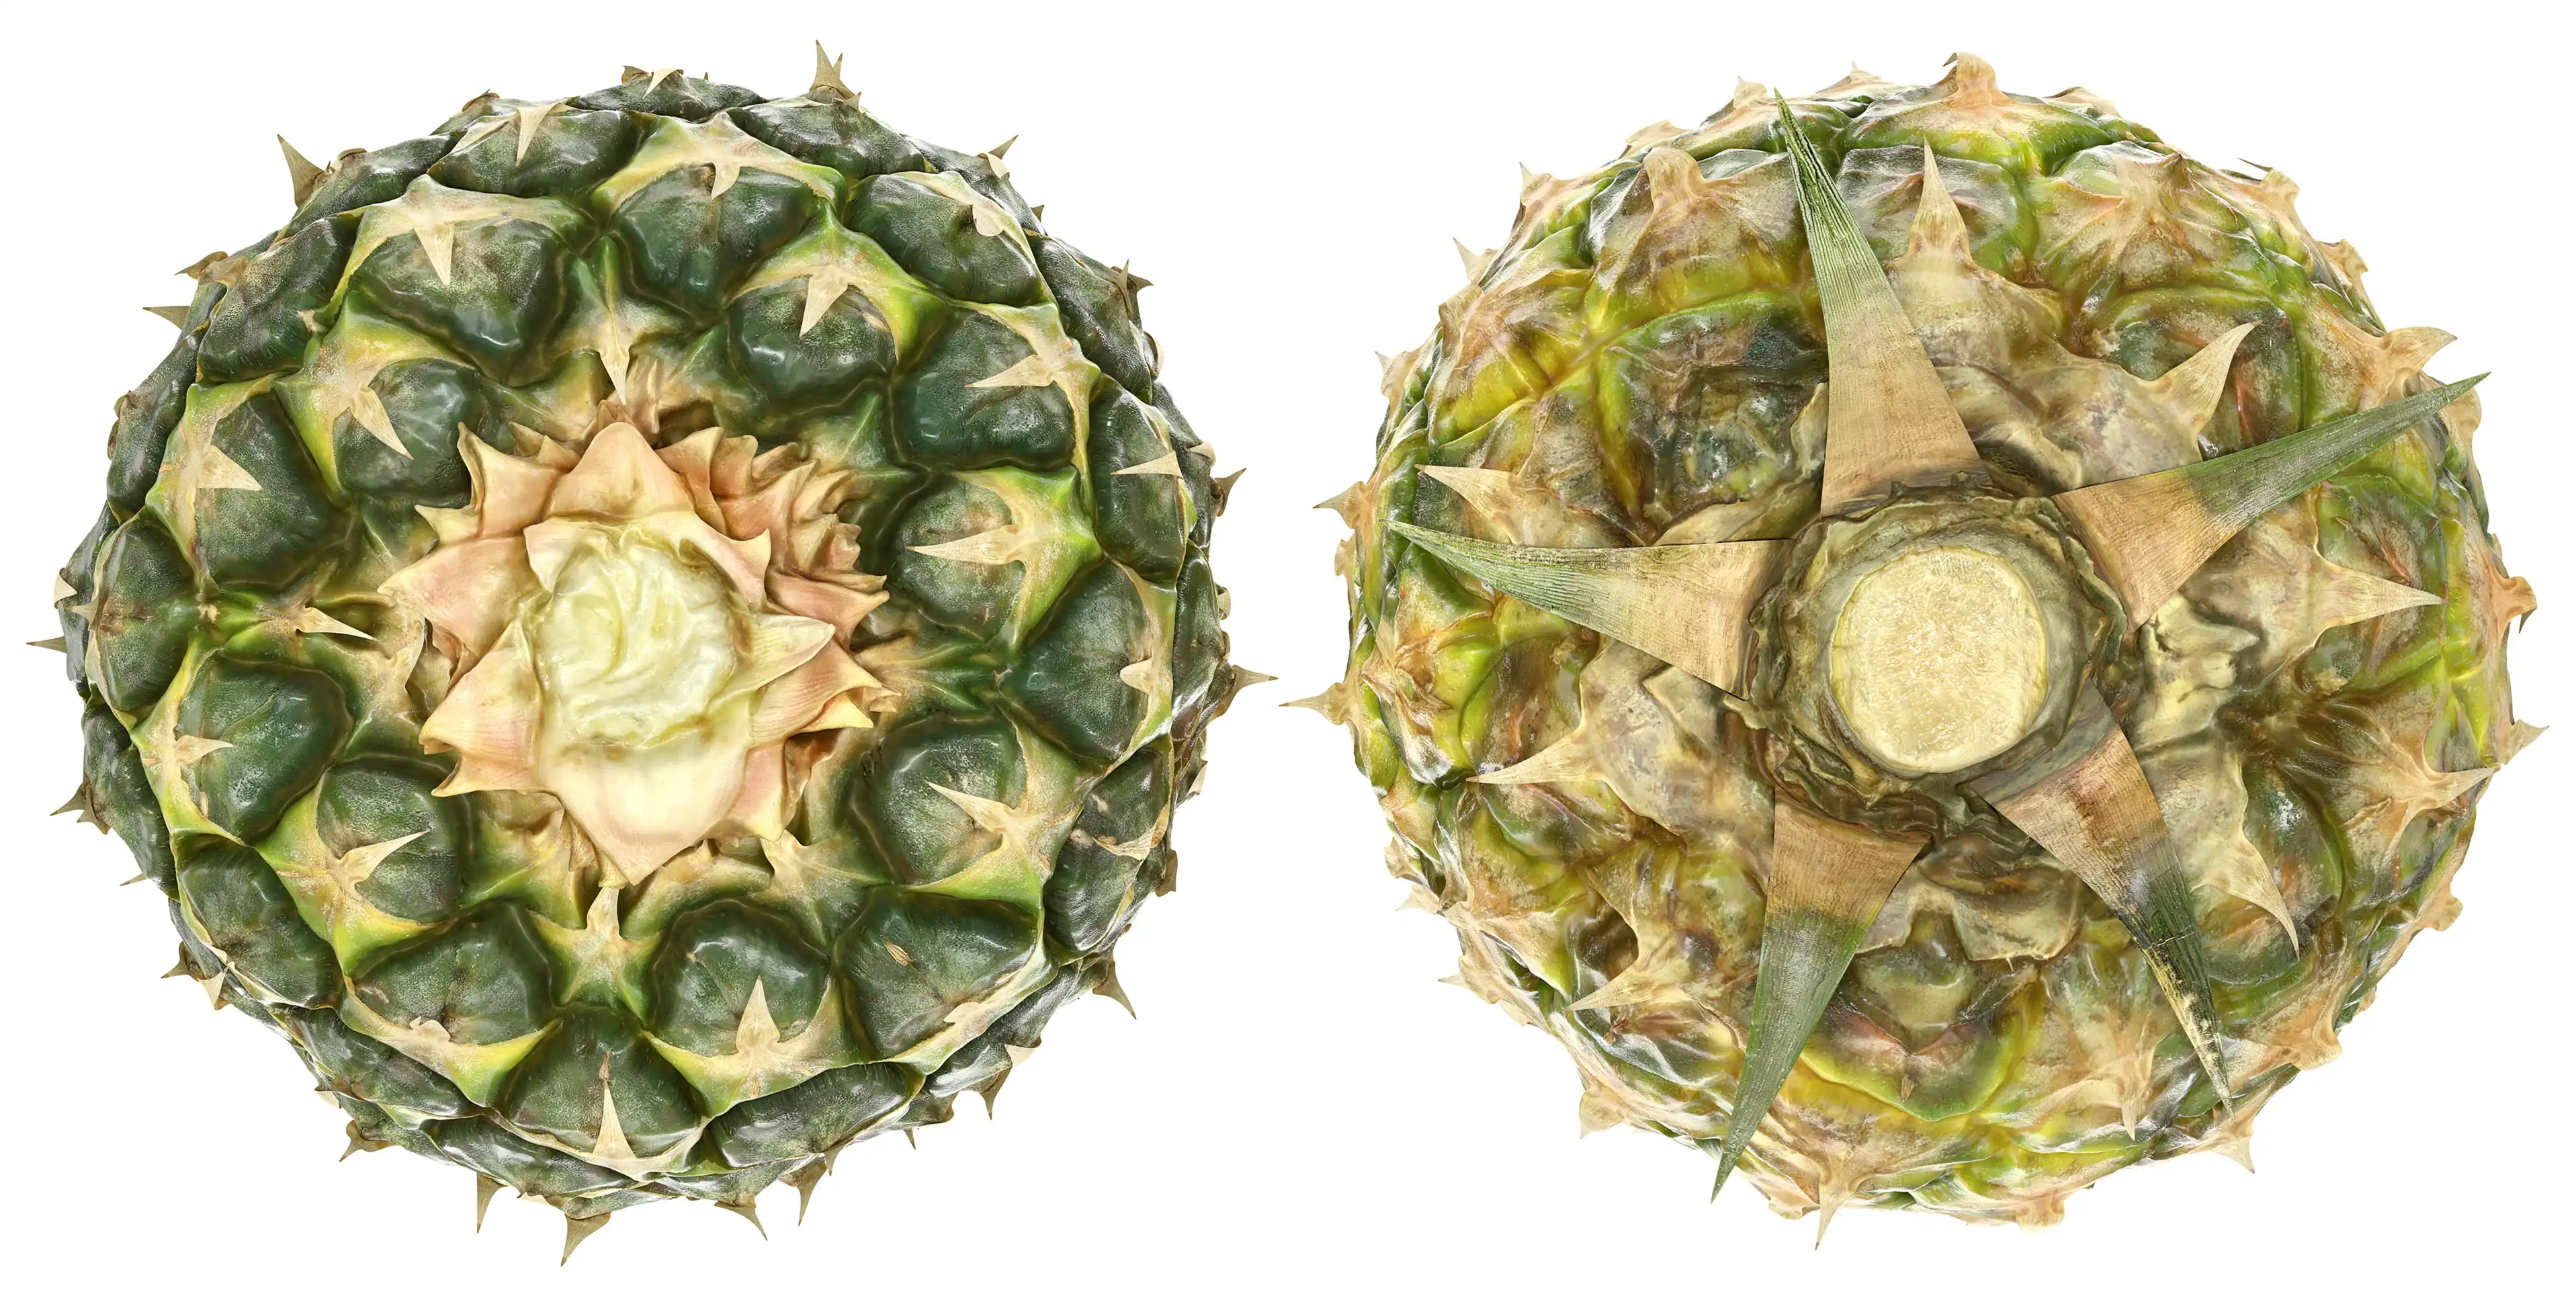 The upper and lower part of the pineapple fruit are shown, where you can see crown and stem sections.